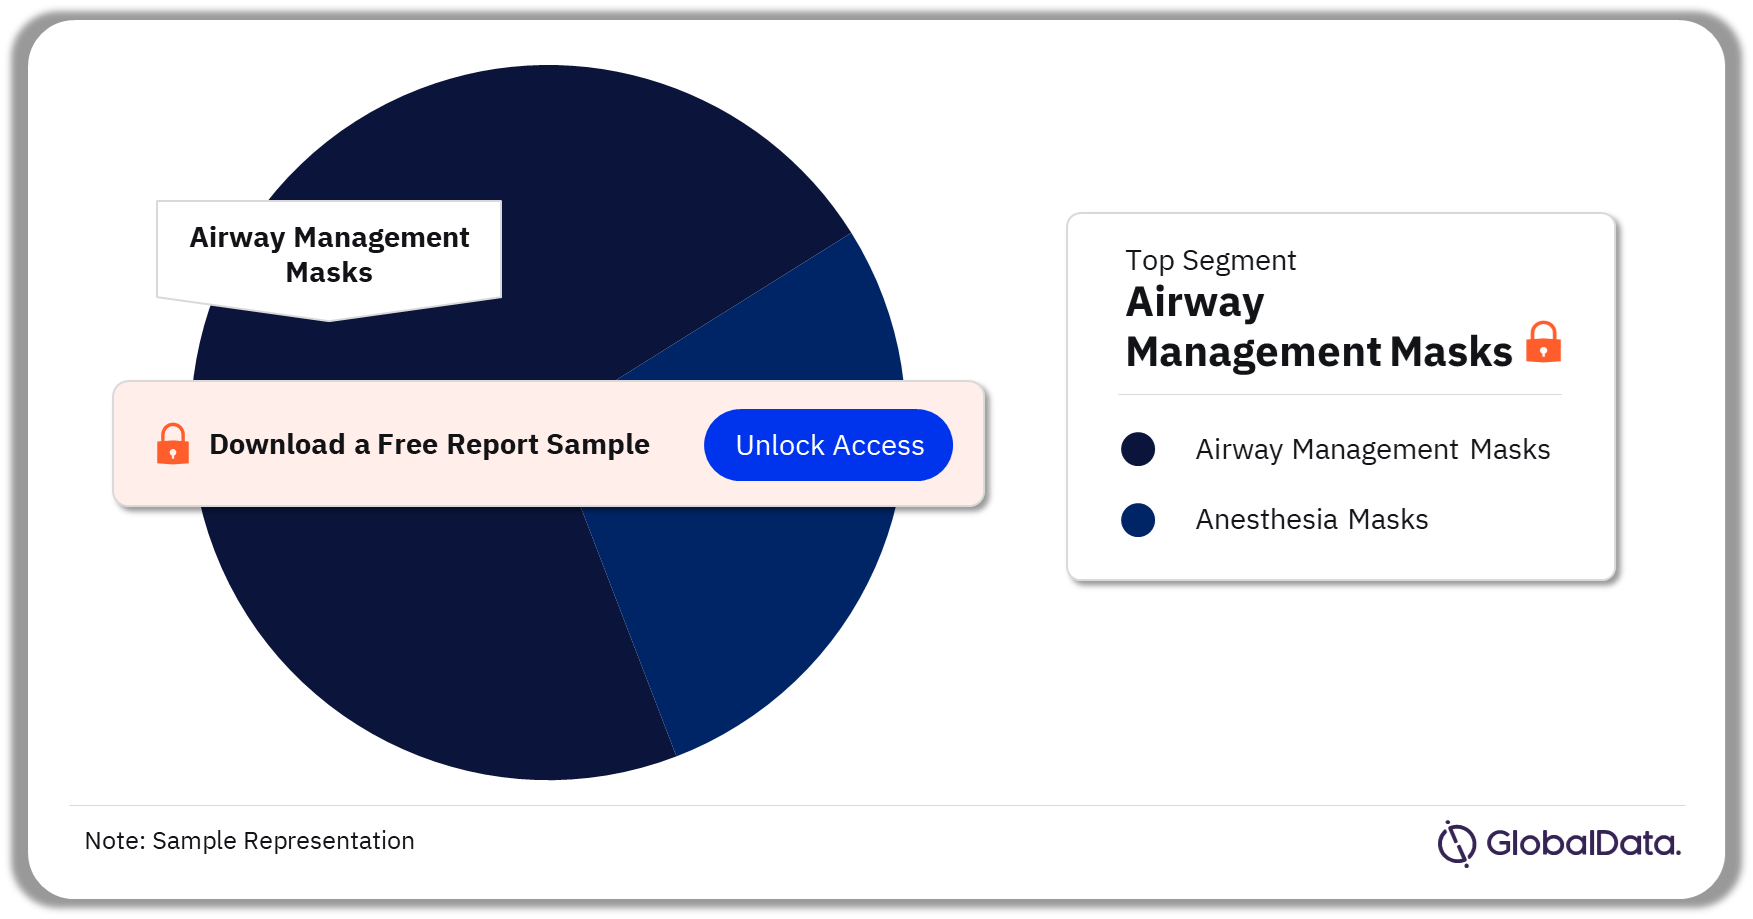 Anesthesia and Laryngeal Masks Market Analysis by Segments, 2022 (%)